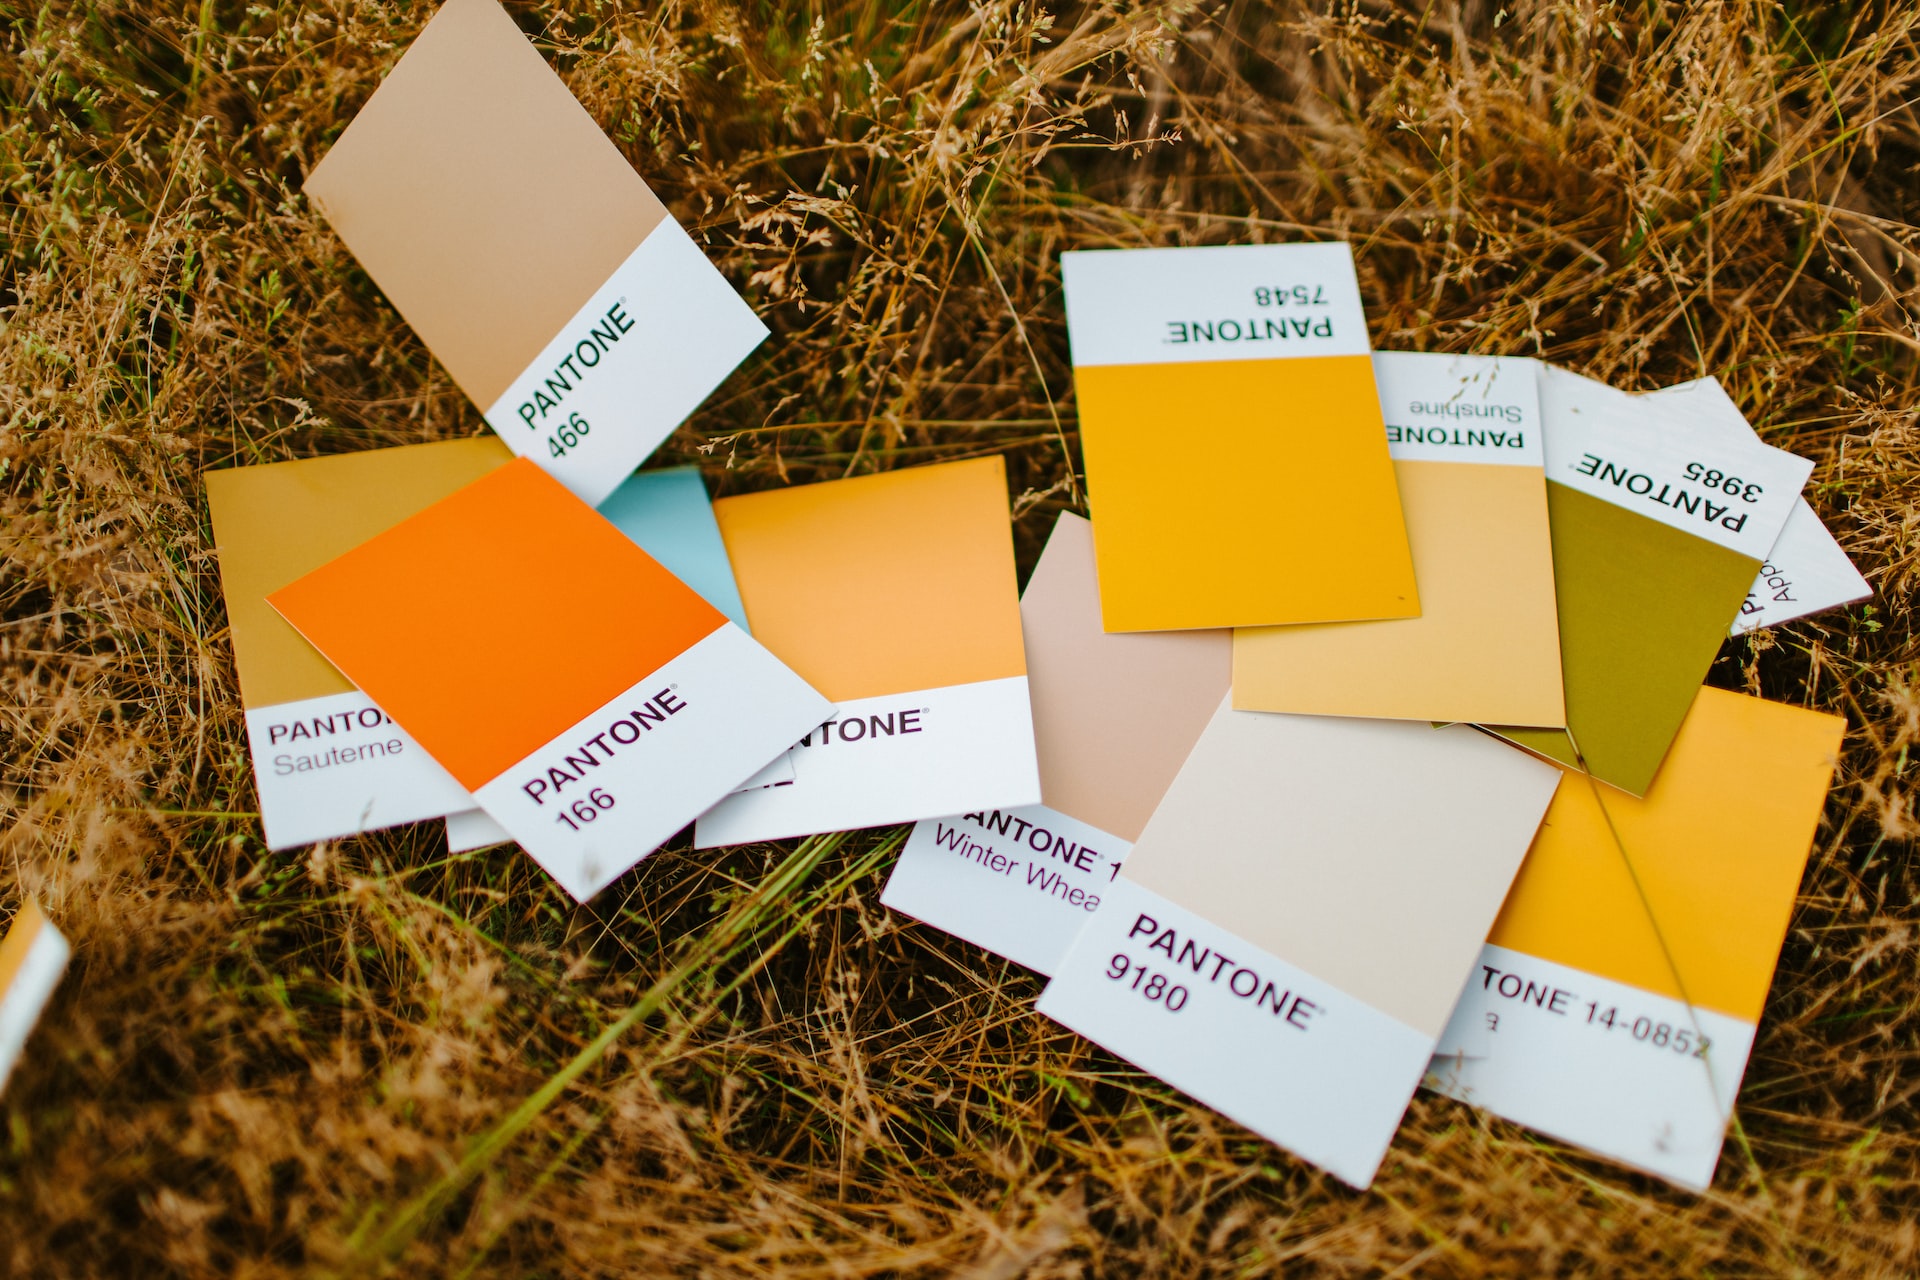 How to Choose the Right Pantone Color for Printing - pantone color swatches